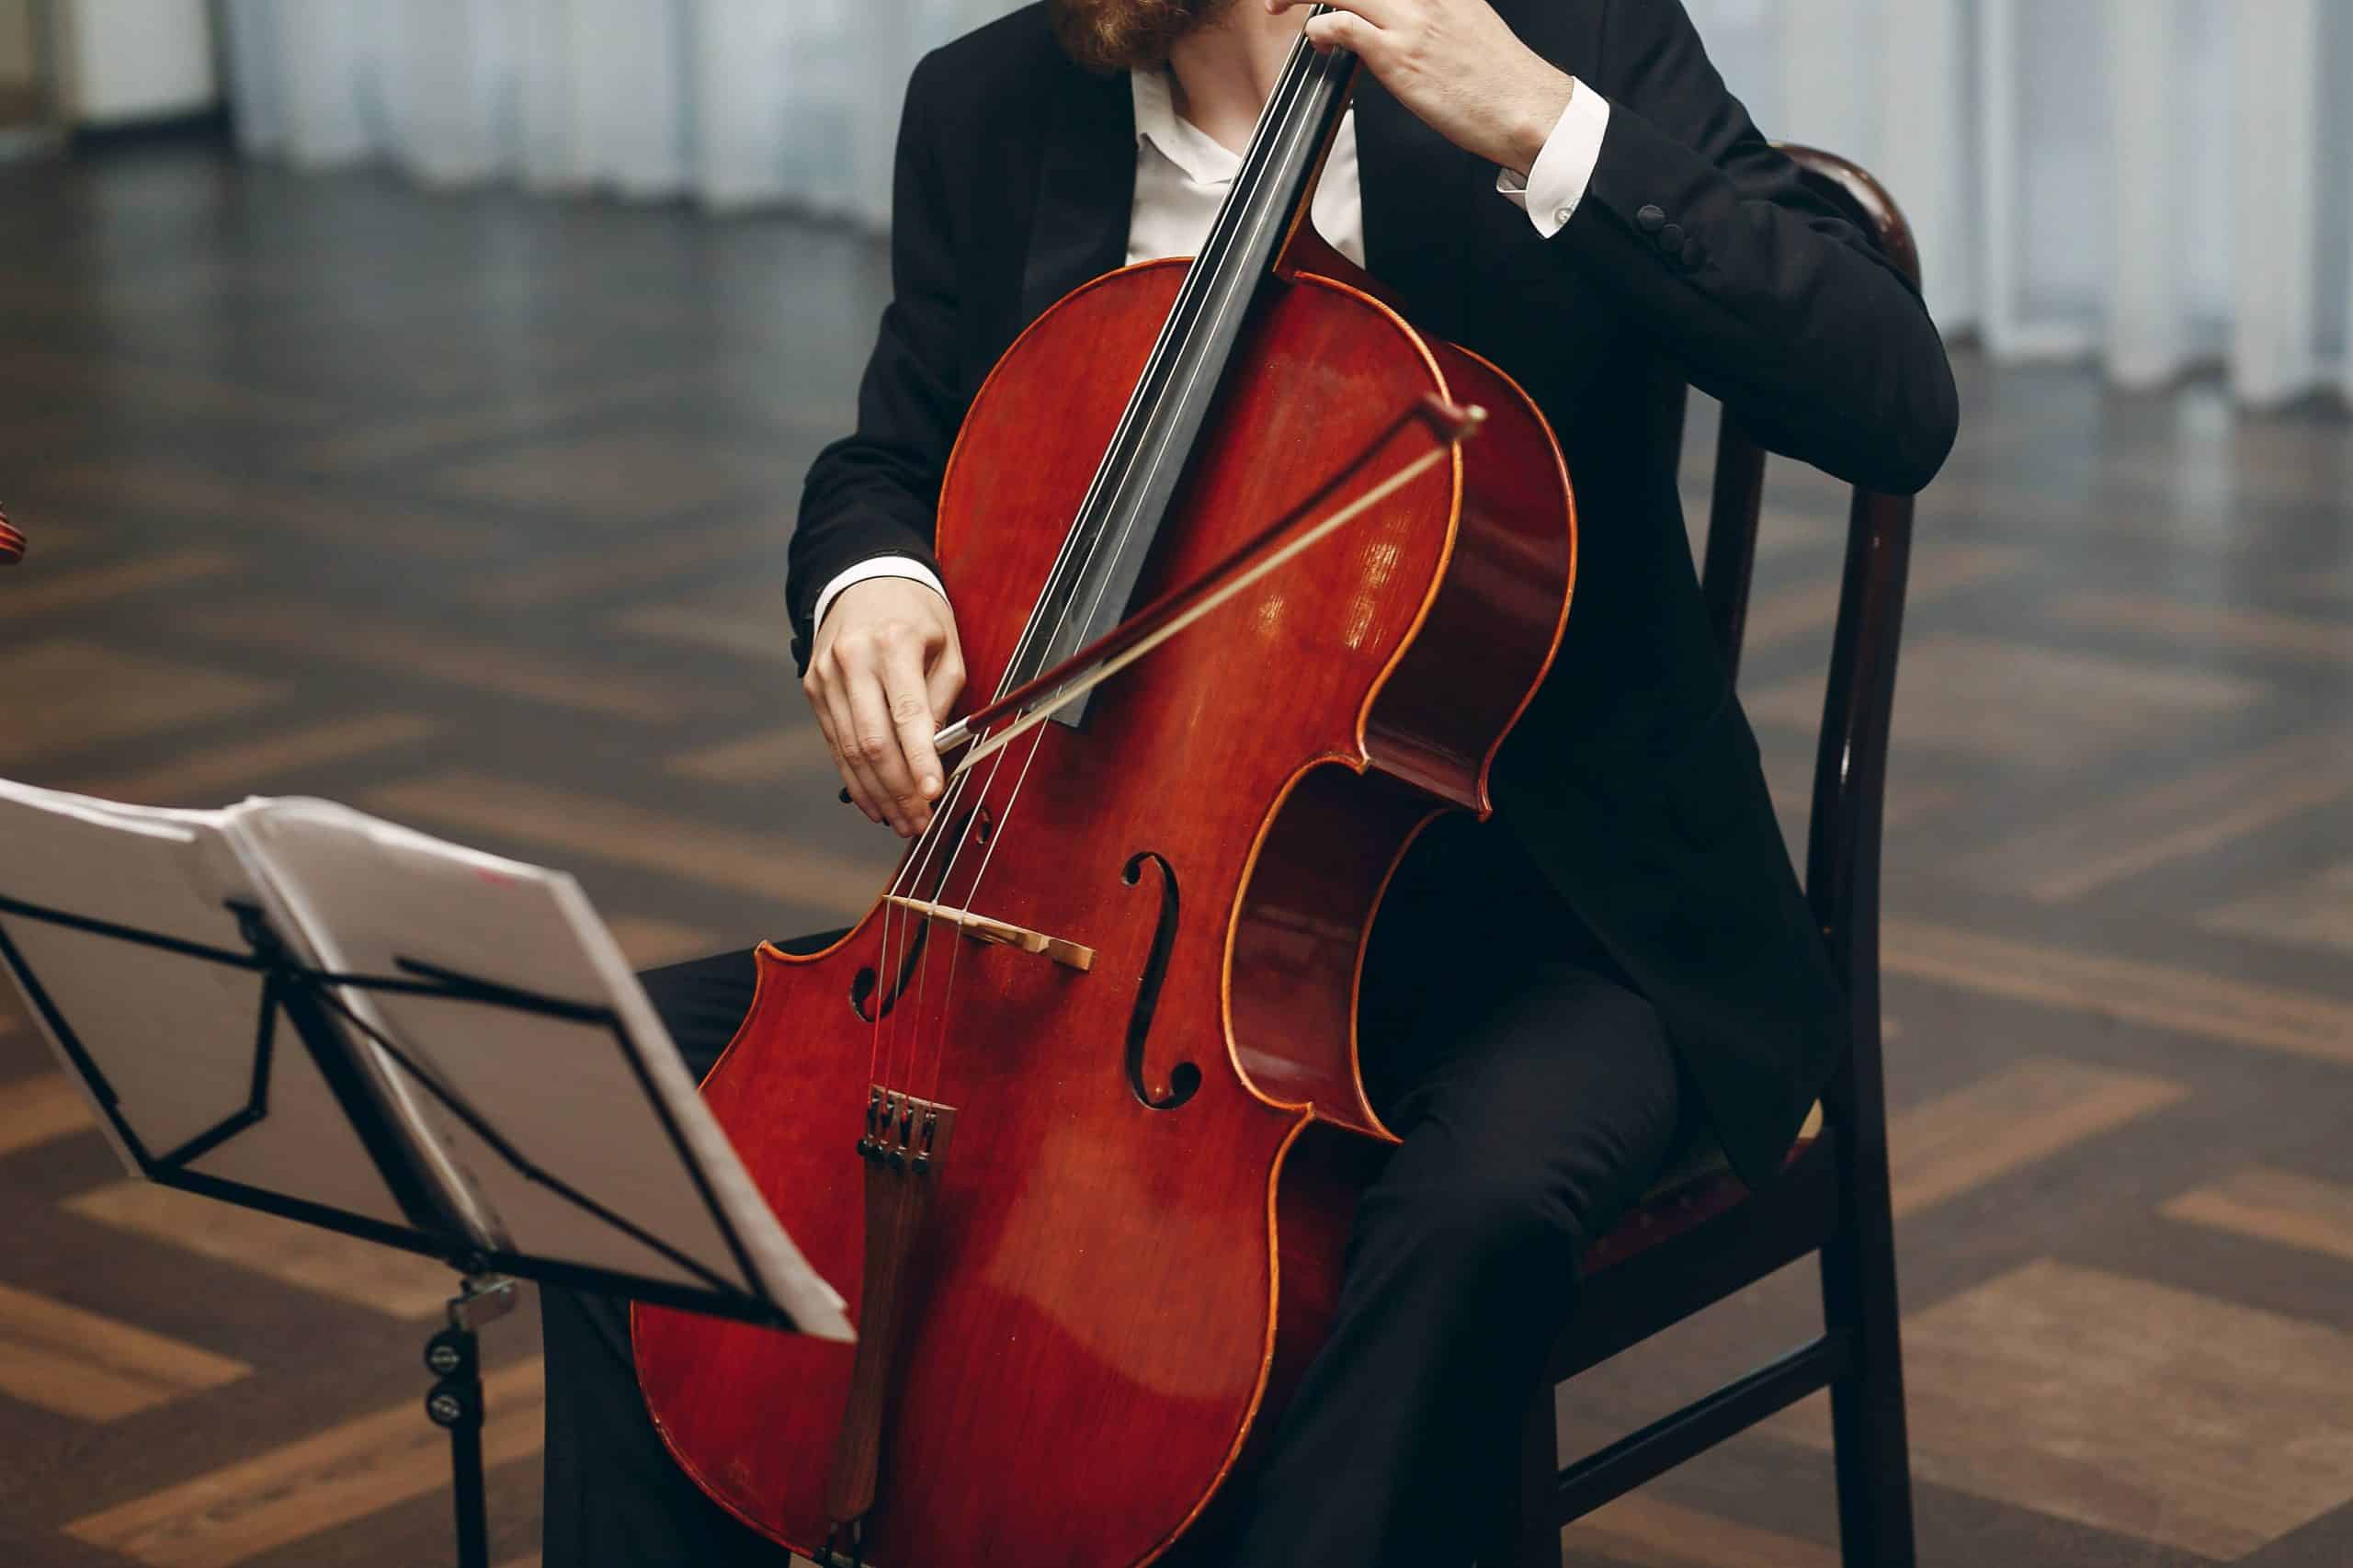 Tips to help you play the cello like a pro